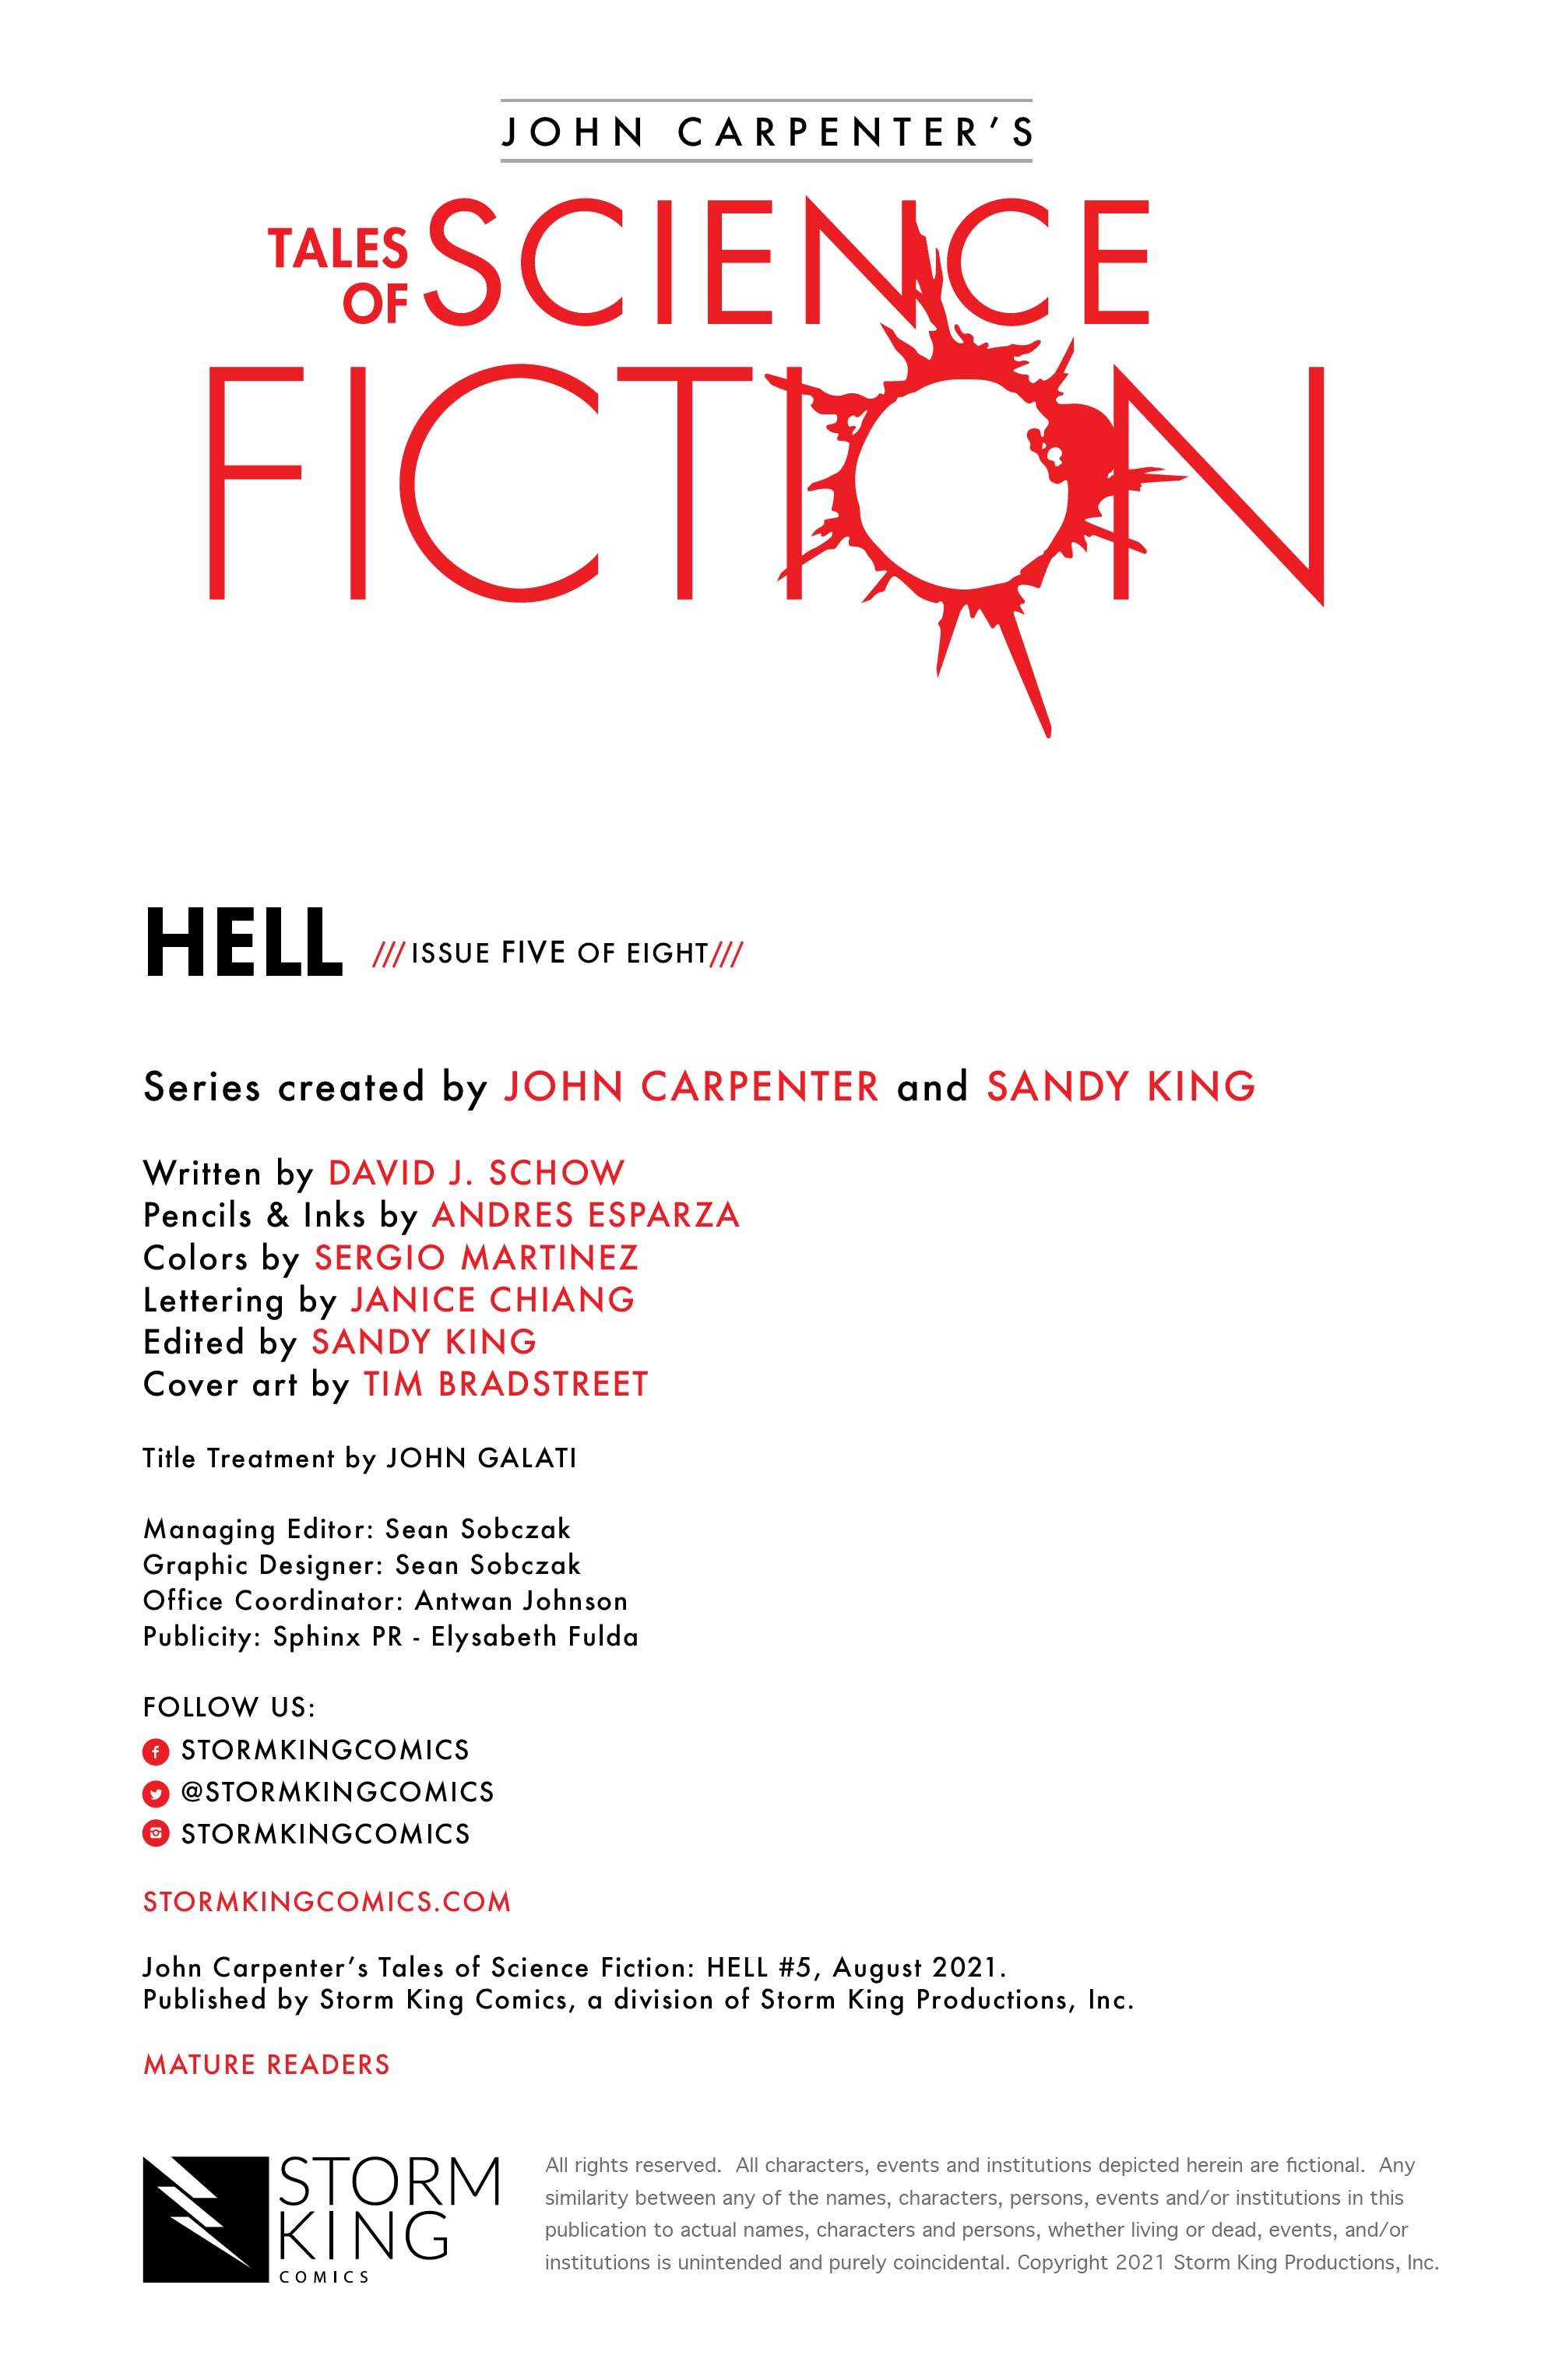 Read online John Carpenter's Tales of Science Fiction: HELL comic -  Issue #5 - 2